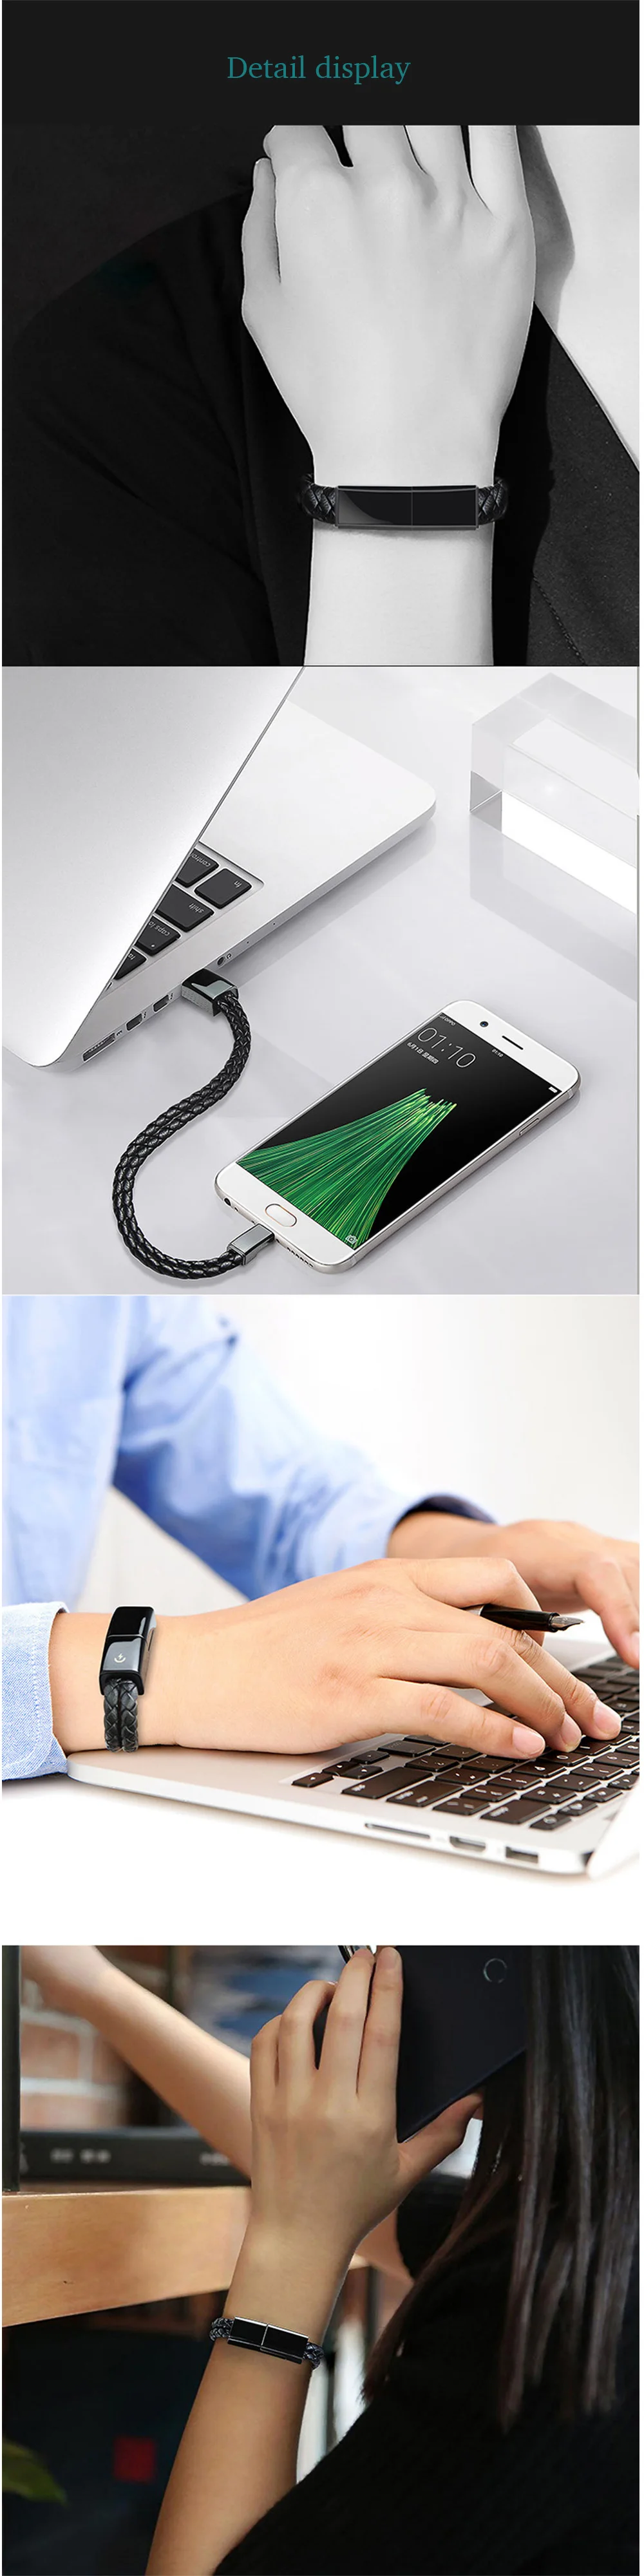 Travel Fast USB Phone Chargers Bracelet Charger Data Charging Cable Sync Cord For iPhone 7 6s Bracelet Men Steel Magnetic Clasp